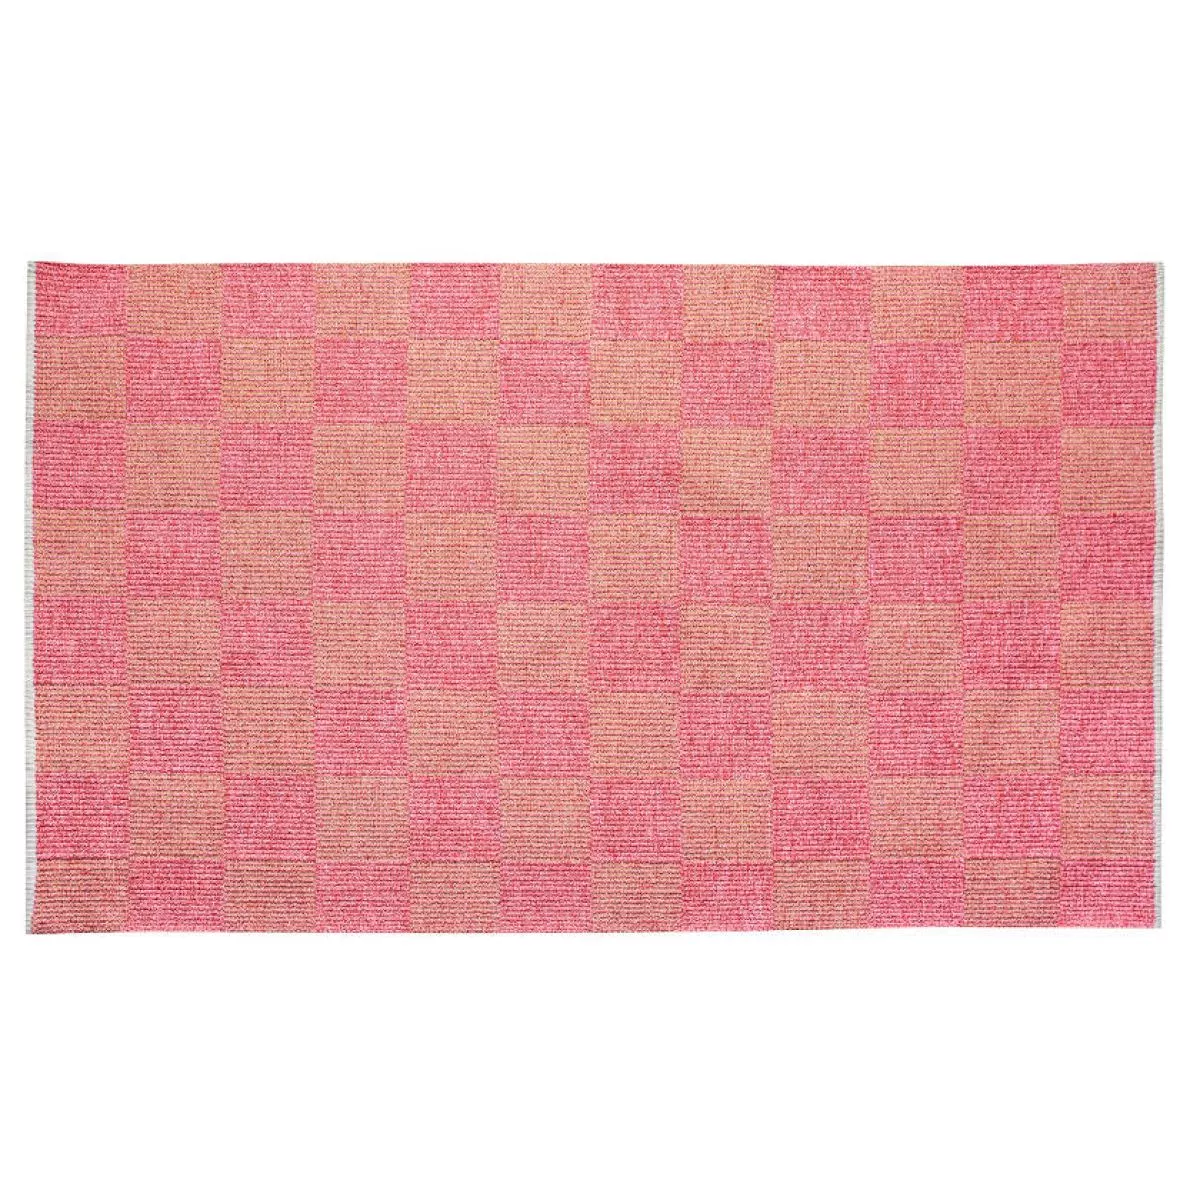 Pink version: Handwoven cork, cotton and wool rug Square | Kunstbaron